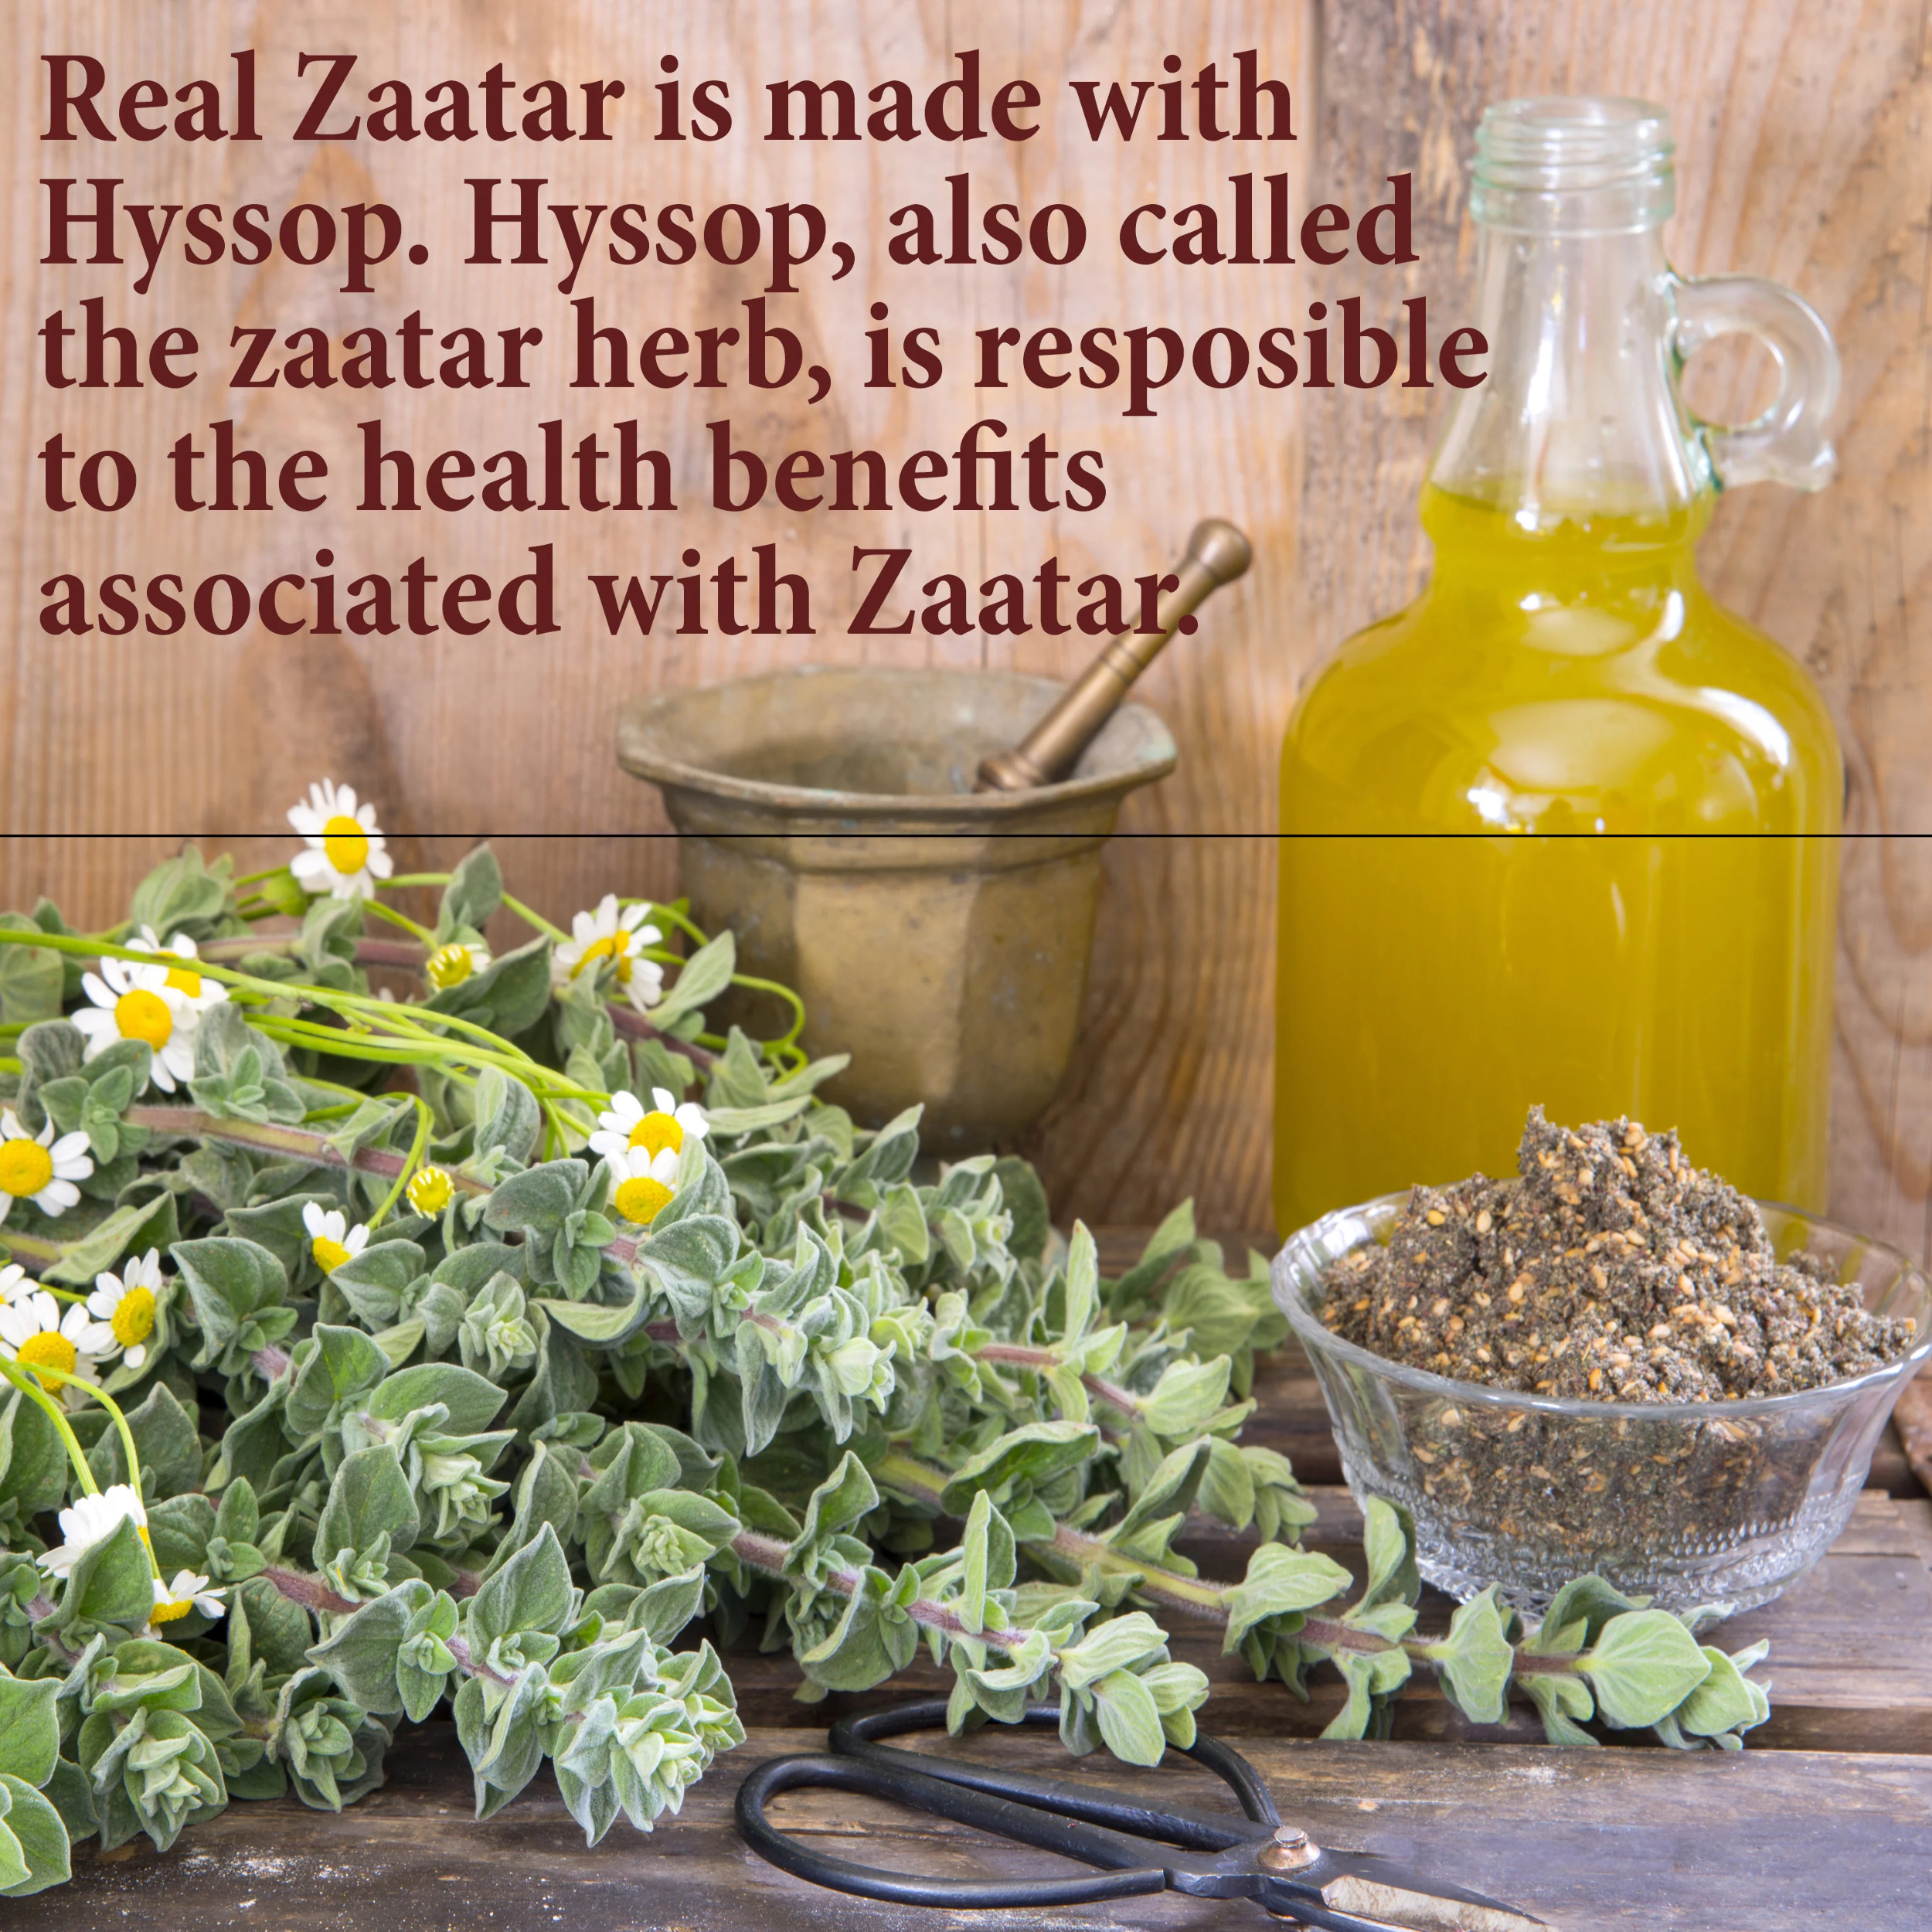 The Spice Way Real Zaatar - Middle Eastern Spice Blend – All Natural with Hyssop and Sumac - 4 oz. - image 3 of 8